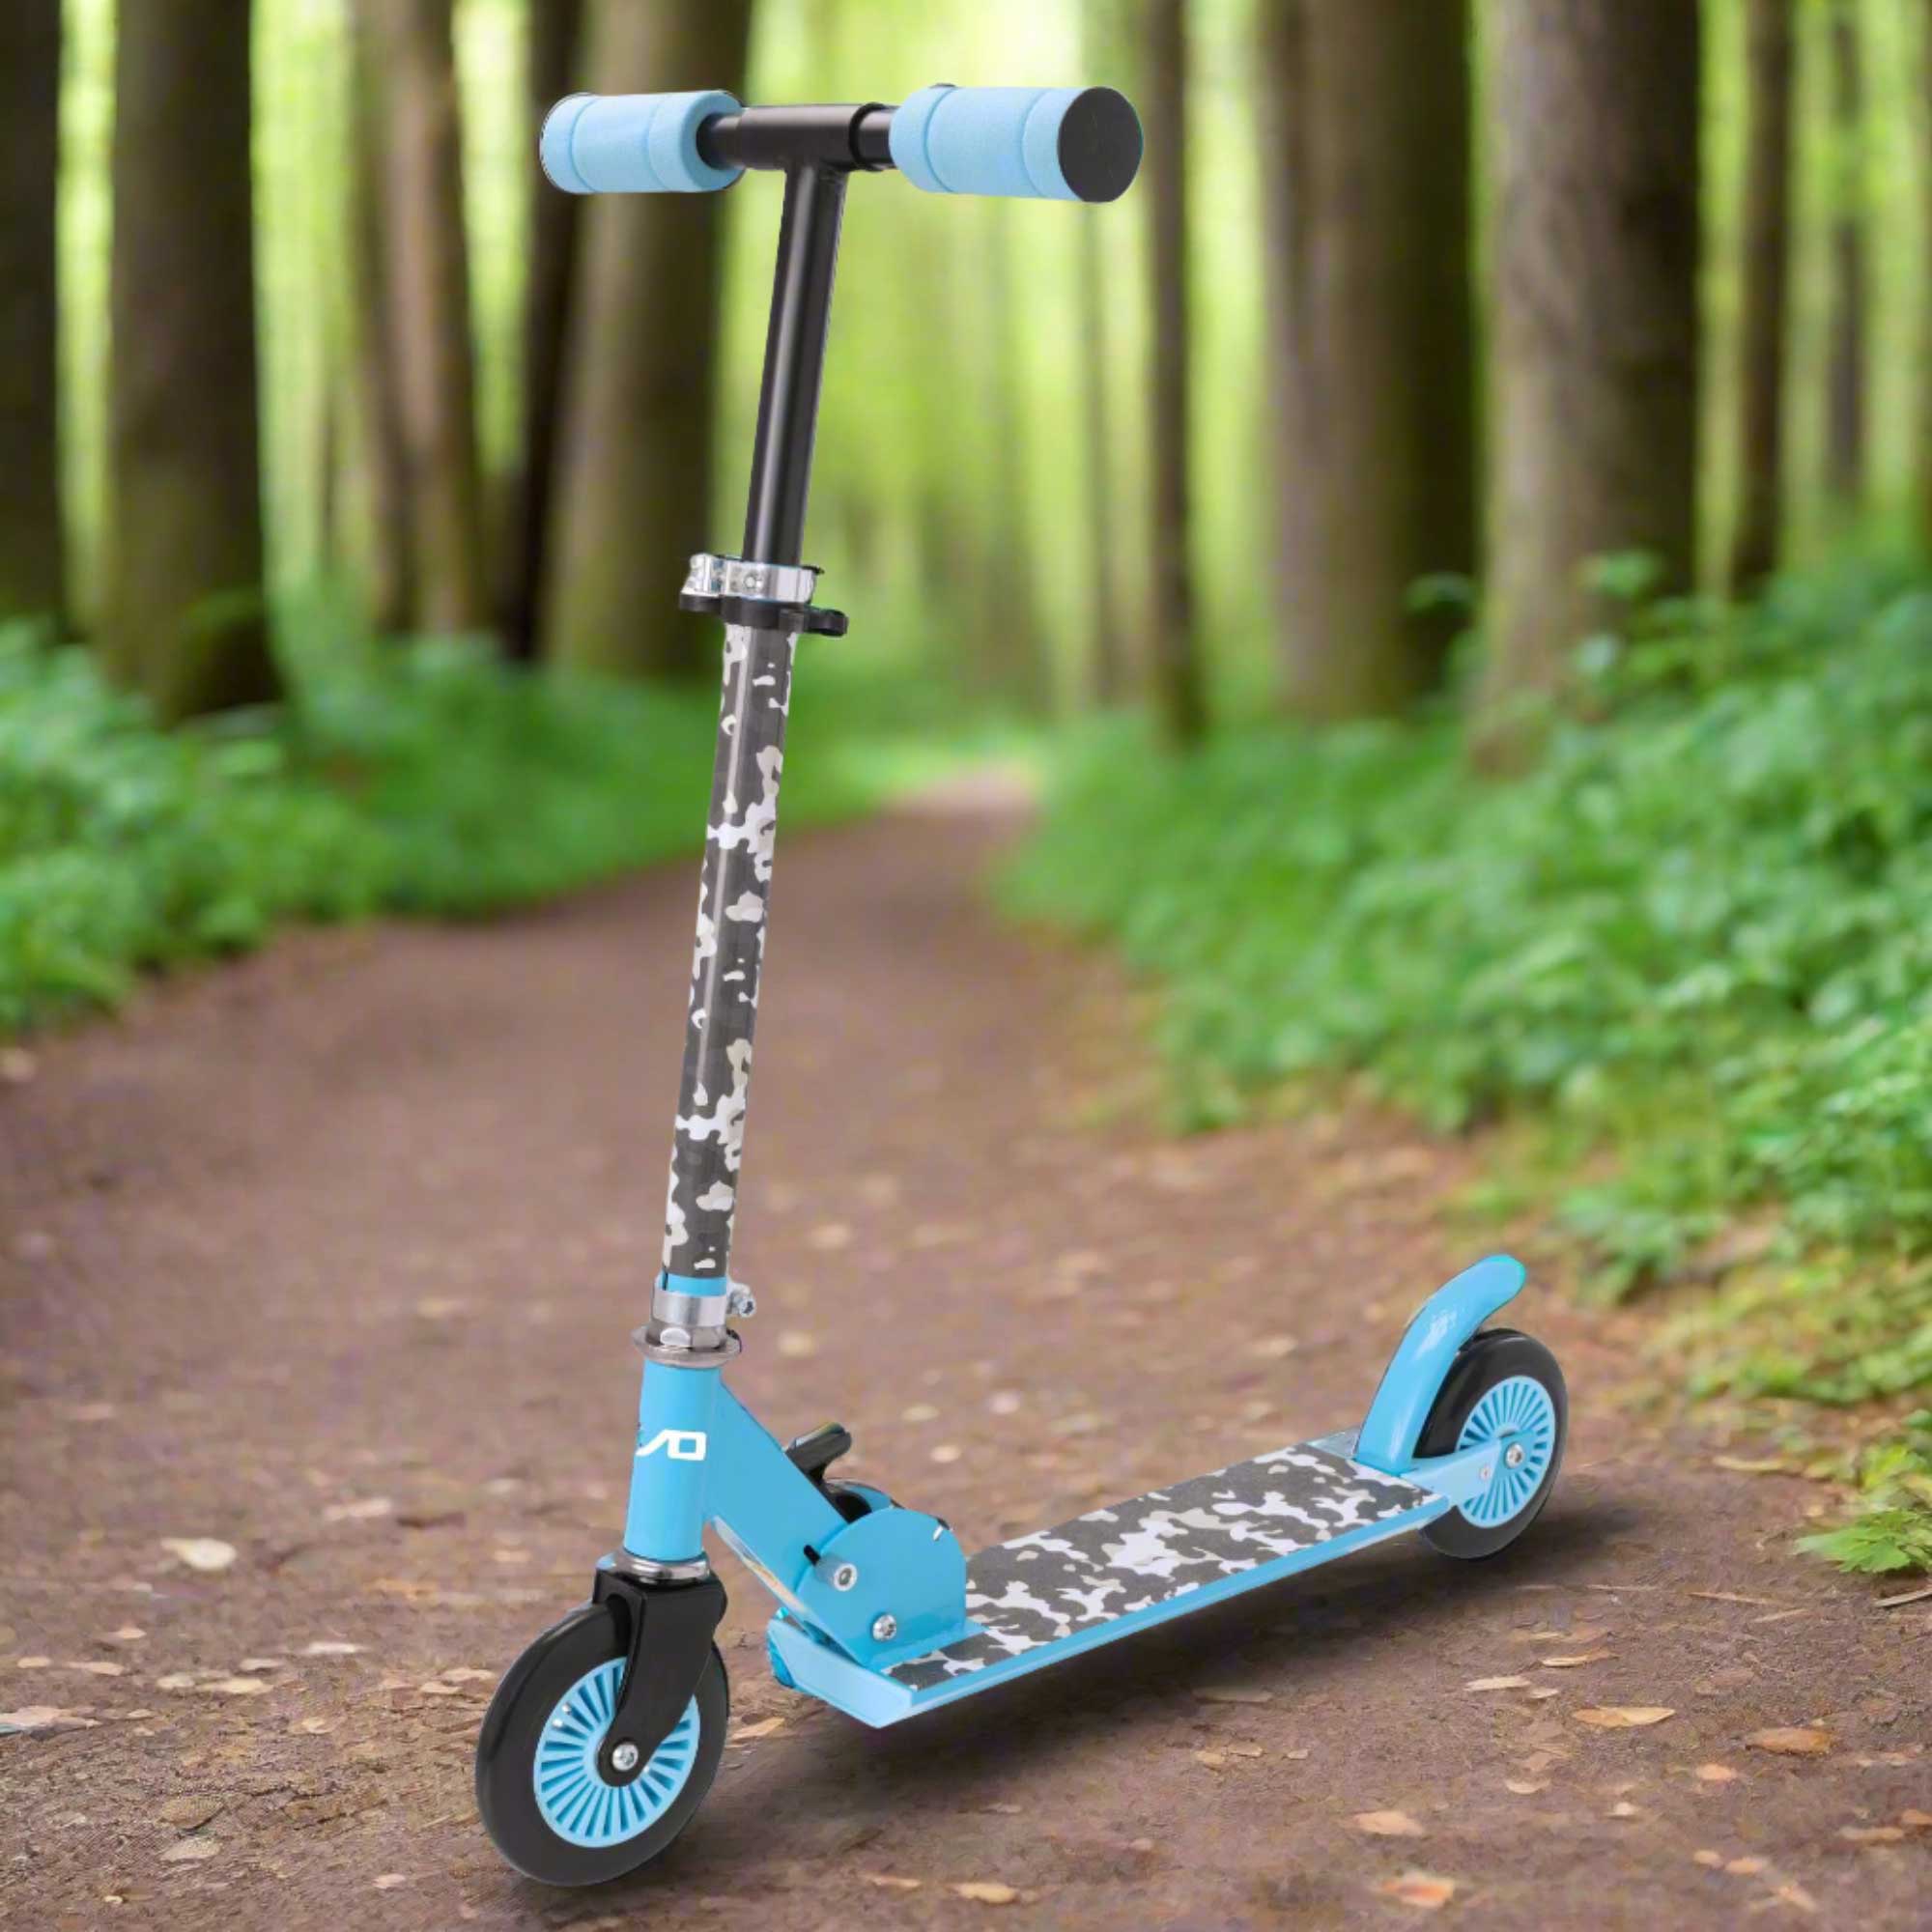 EVO Children's Inline Scooter for Kids Ages 5 and Up with Adjustable Handlebar, perfect for enhancing motor skills and outdoor fun.